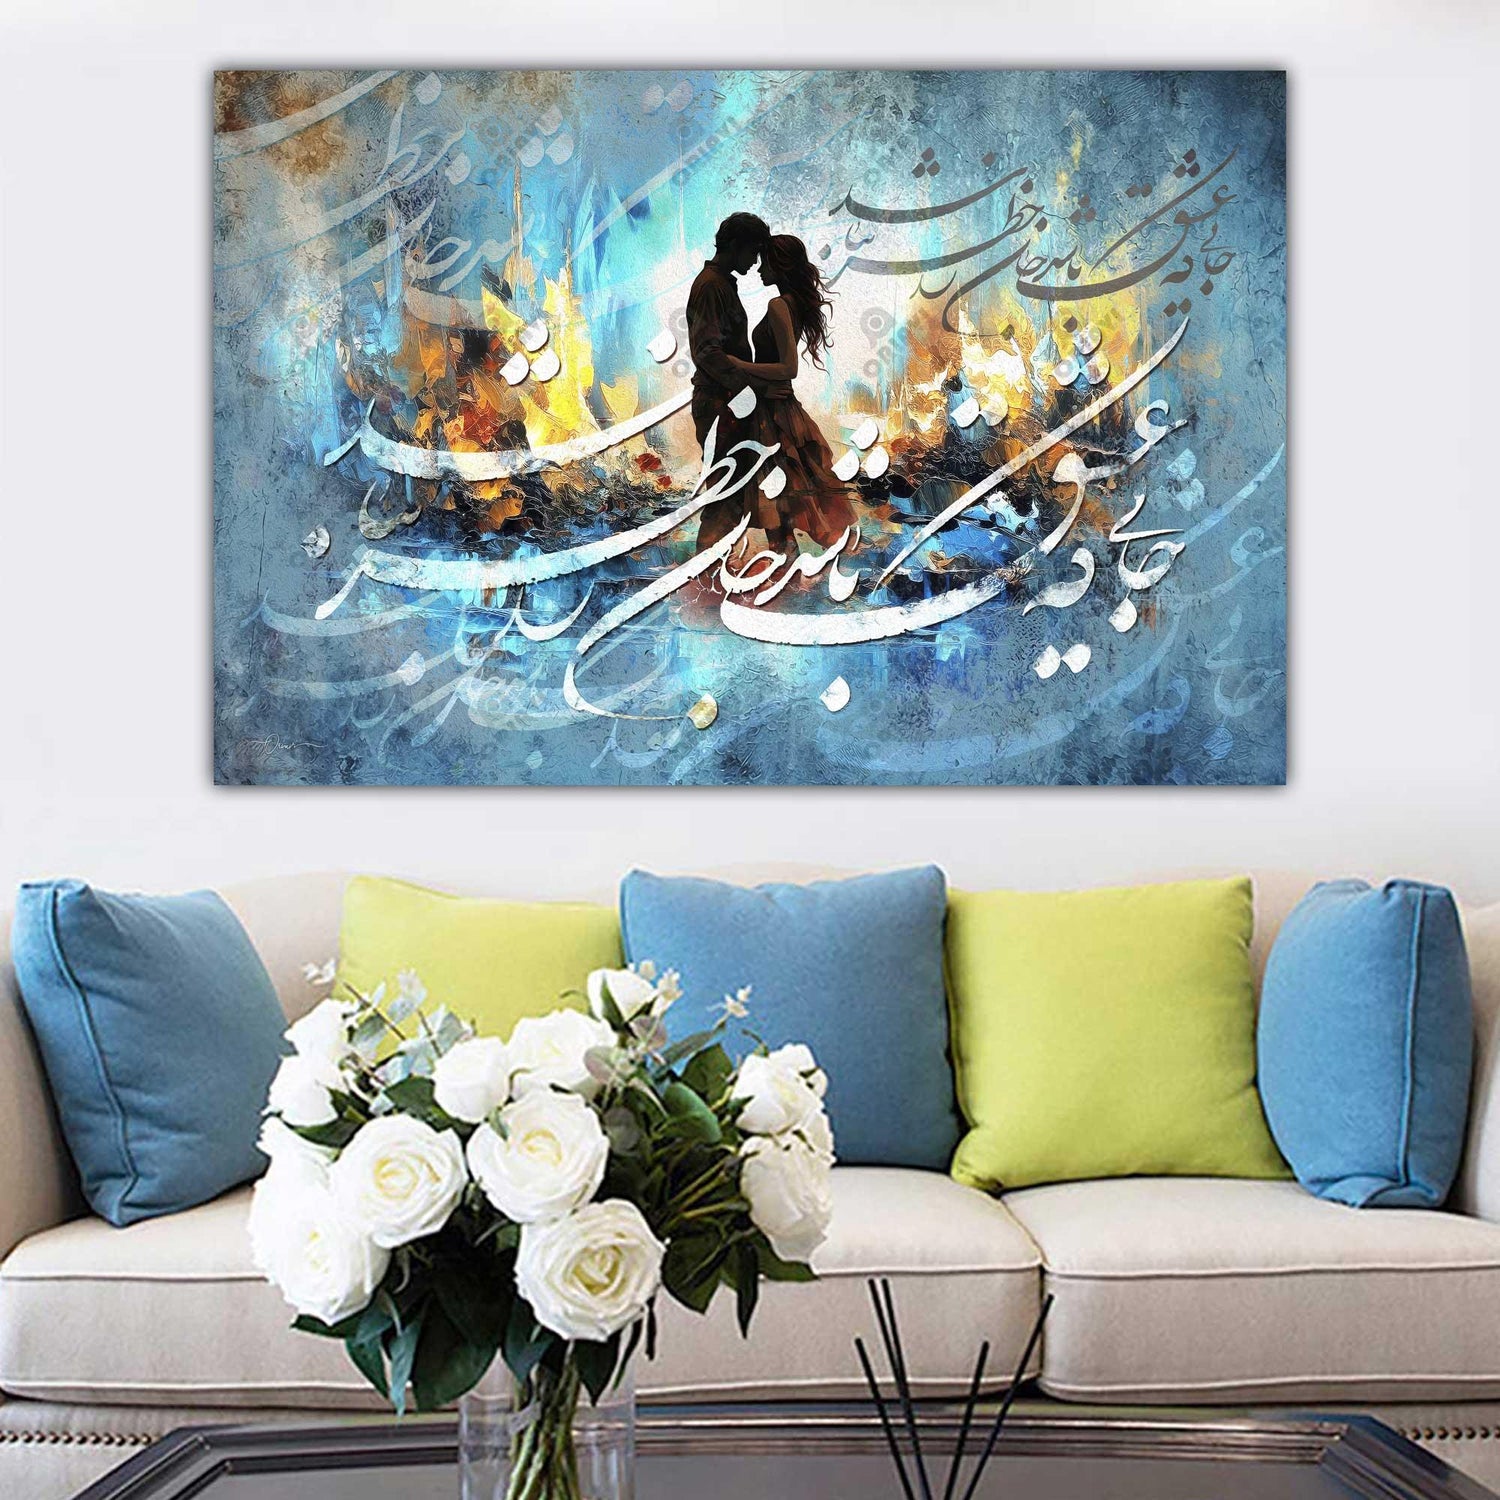 Experience the essence of love and artistry with our modern Persian Wall Art featuring the elegant Persian calligraphy of the verse: 'جایی که عشق باشد، جان را خطر نباشد' (Where there is love, the soul faces no danger)